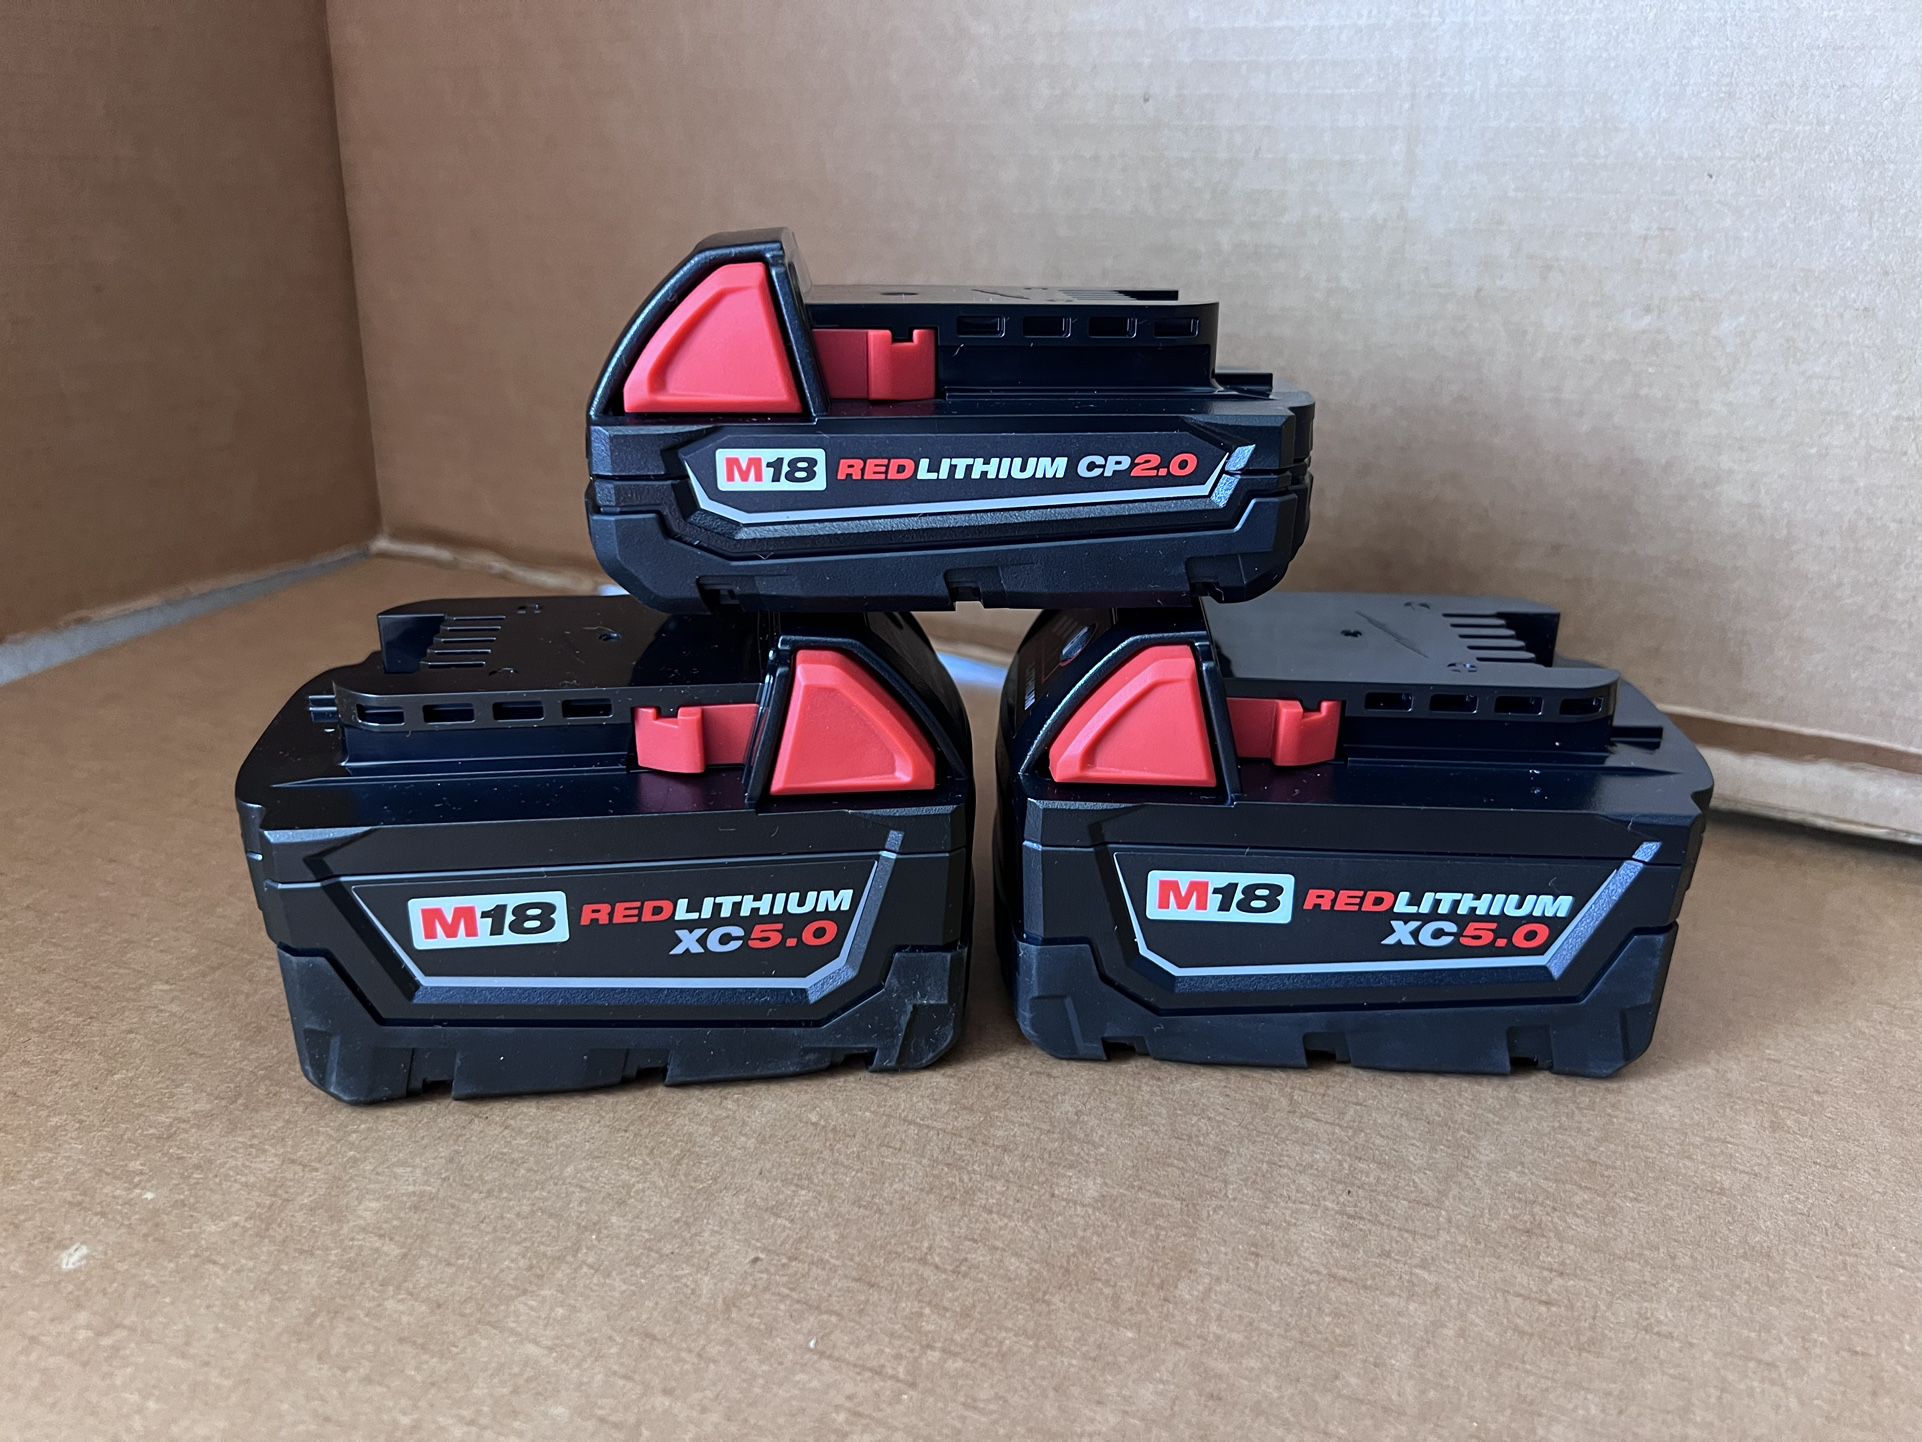 M18 5.0  And  M18 2.0  Milwaukee  Batteries 